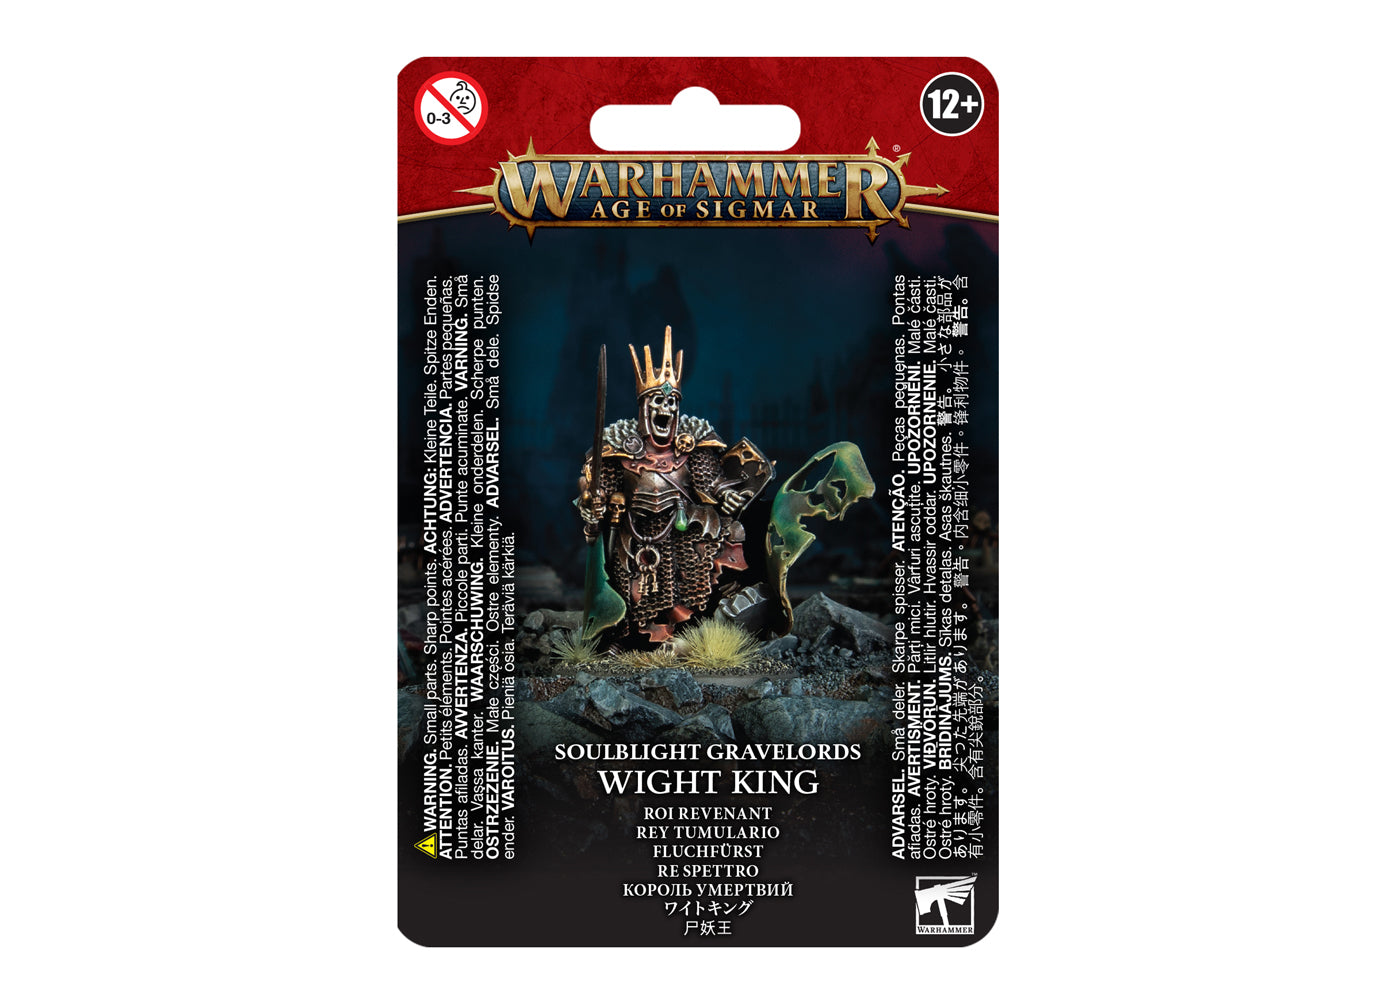 Soulblight Gravelords: Wight king - Loaded Dice